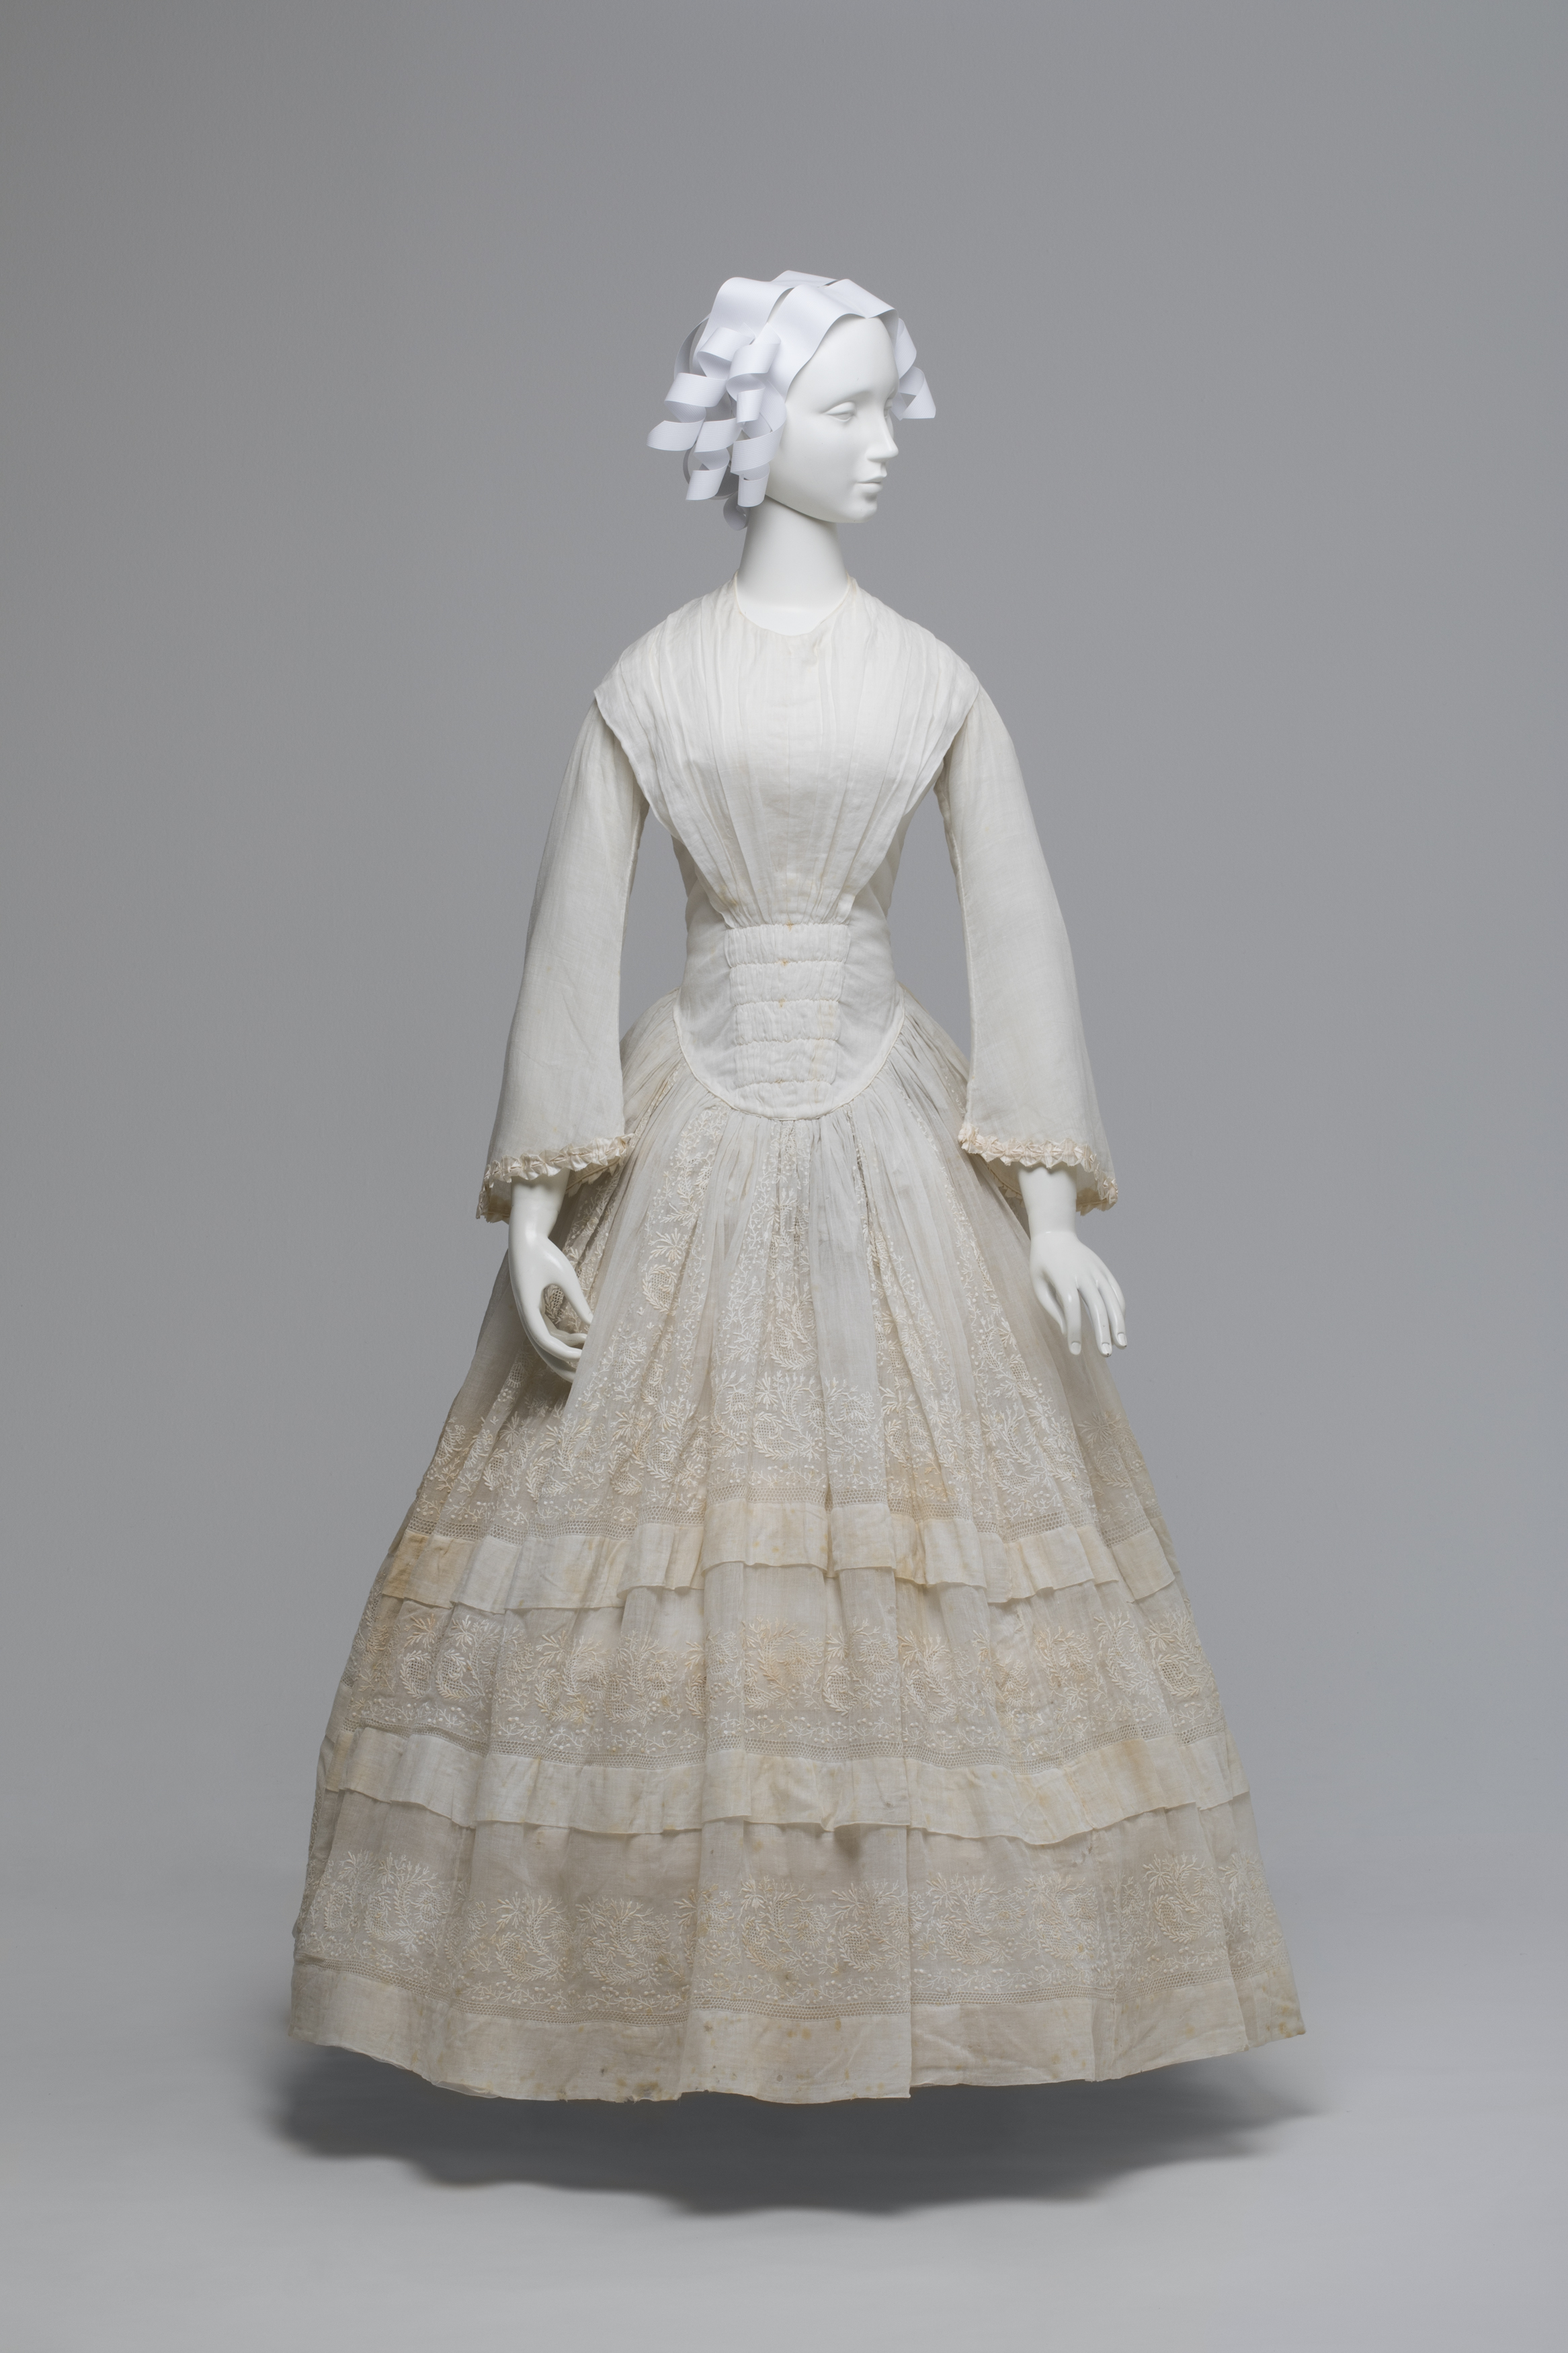 Wedding dress possibly worn by the mother or mother-in-law of Margaret White (nee Fletcher)